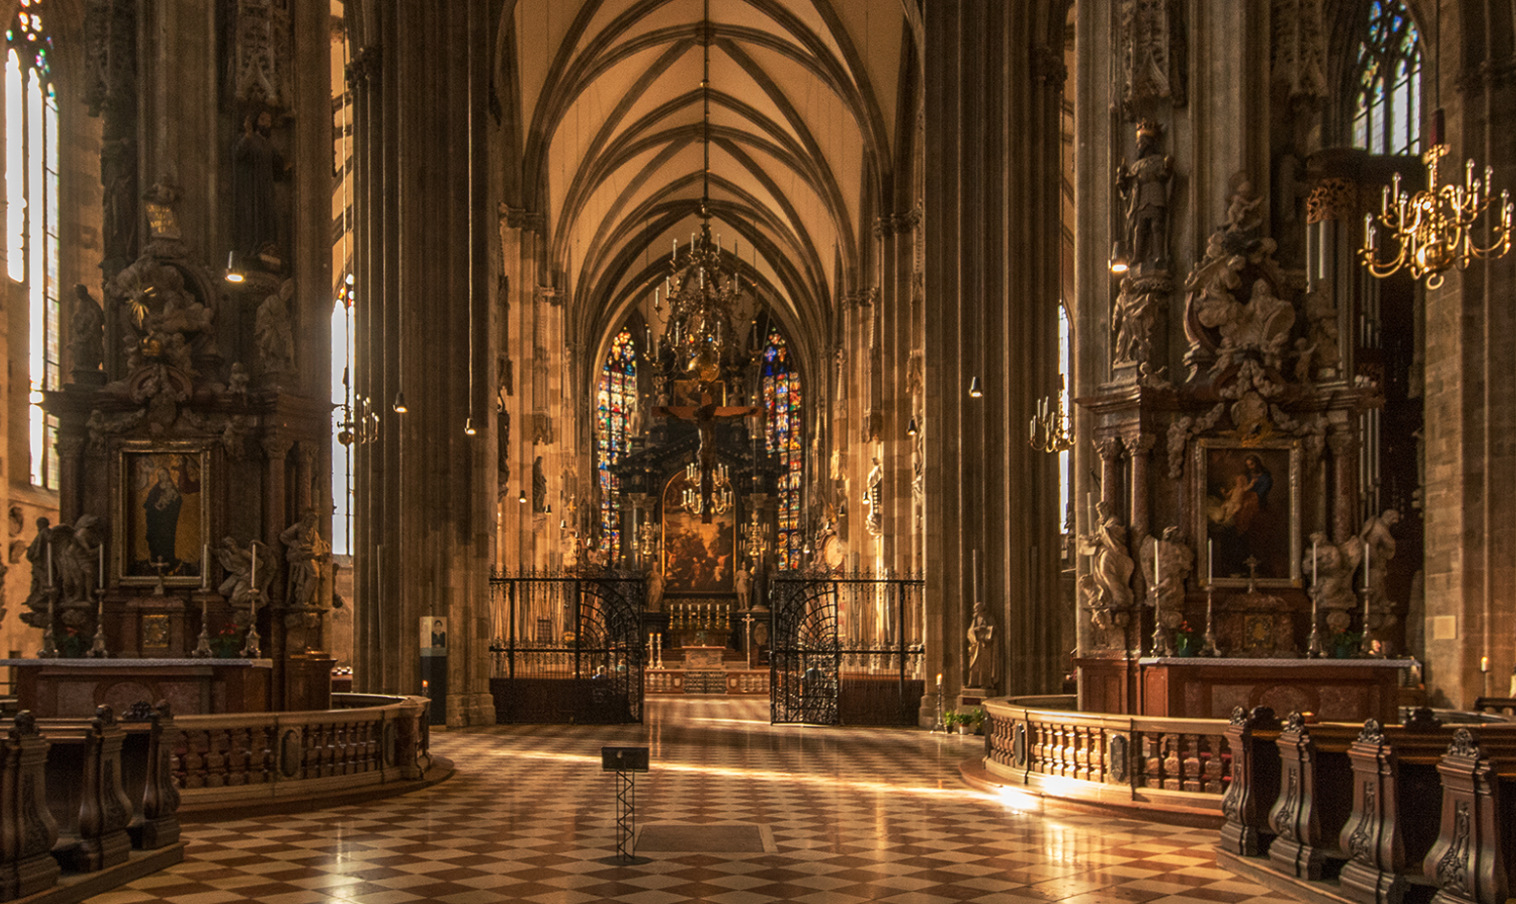 St. Stephan's Cathedral - Vienna, Austria